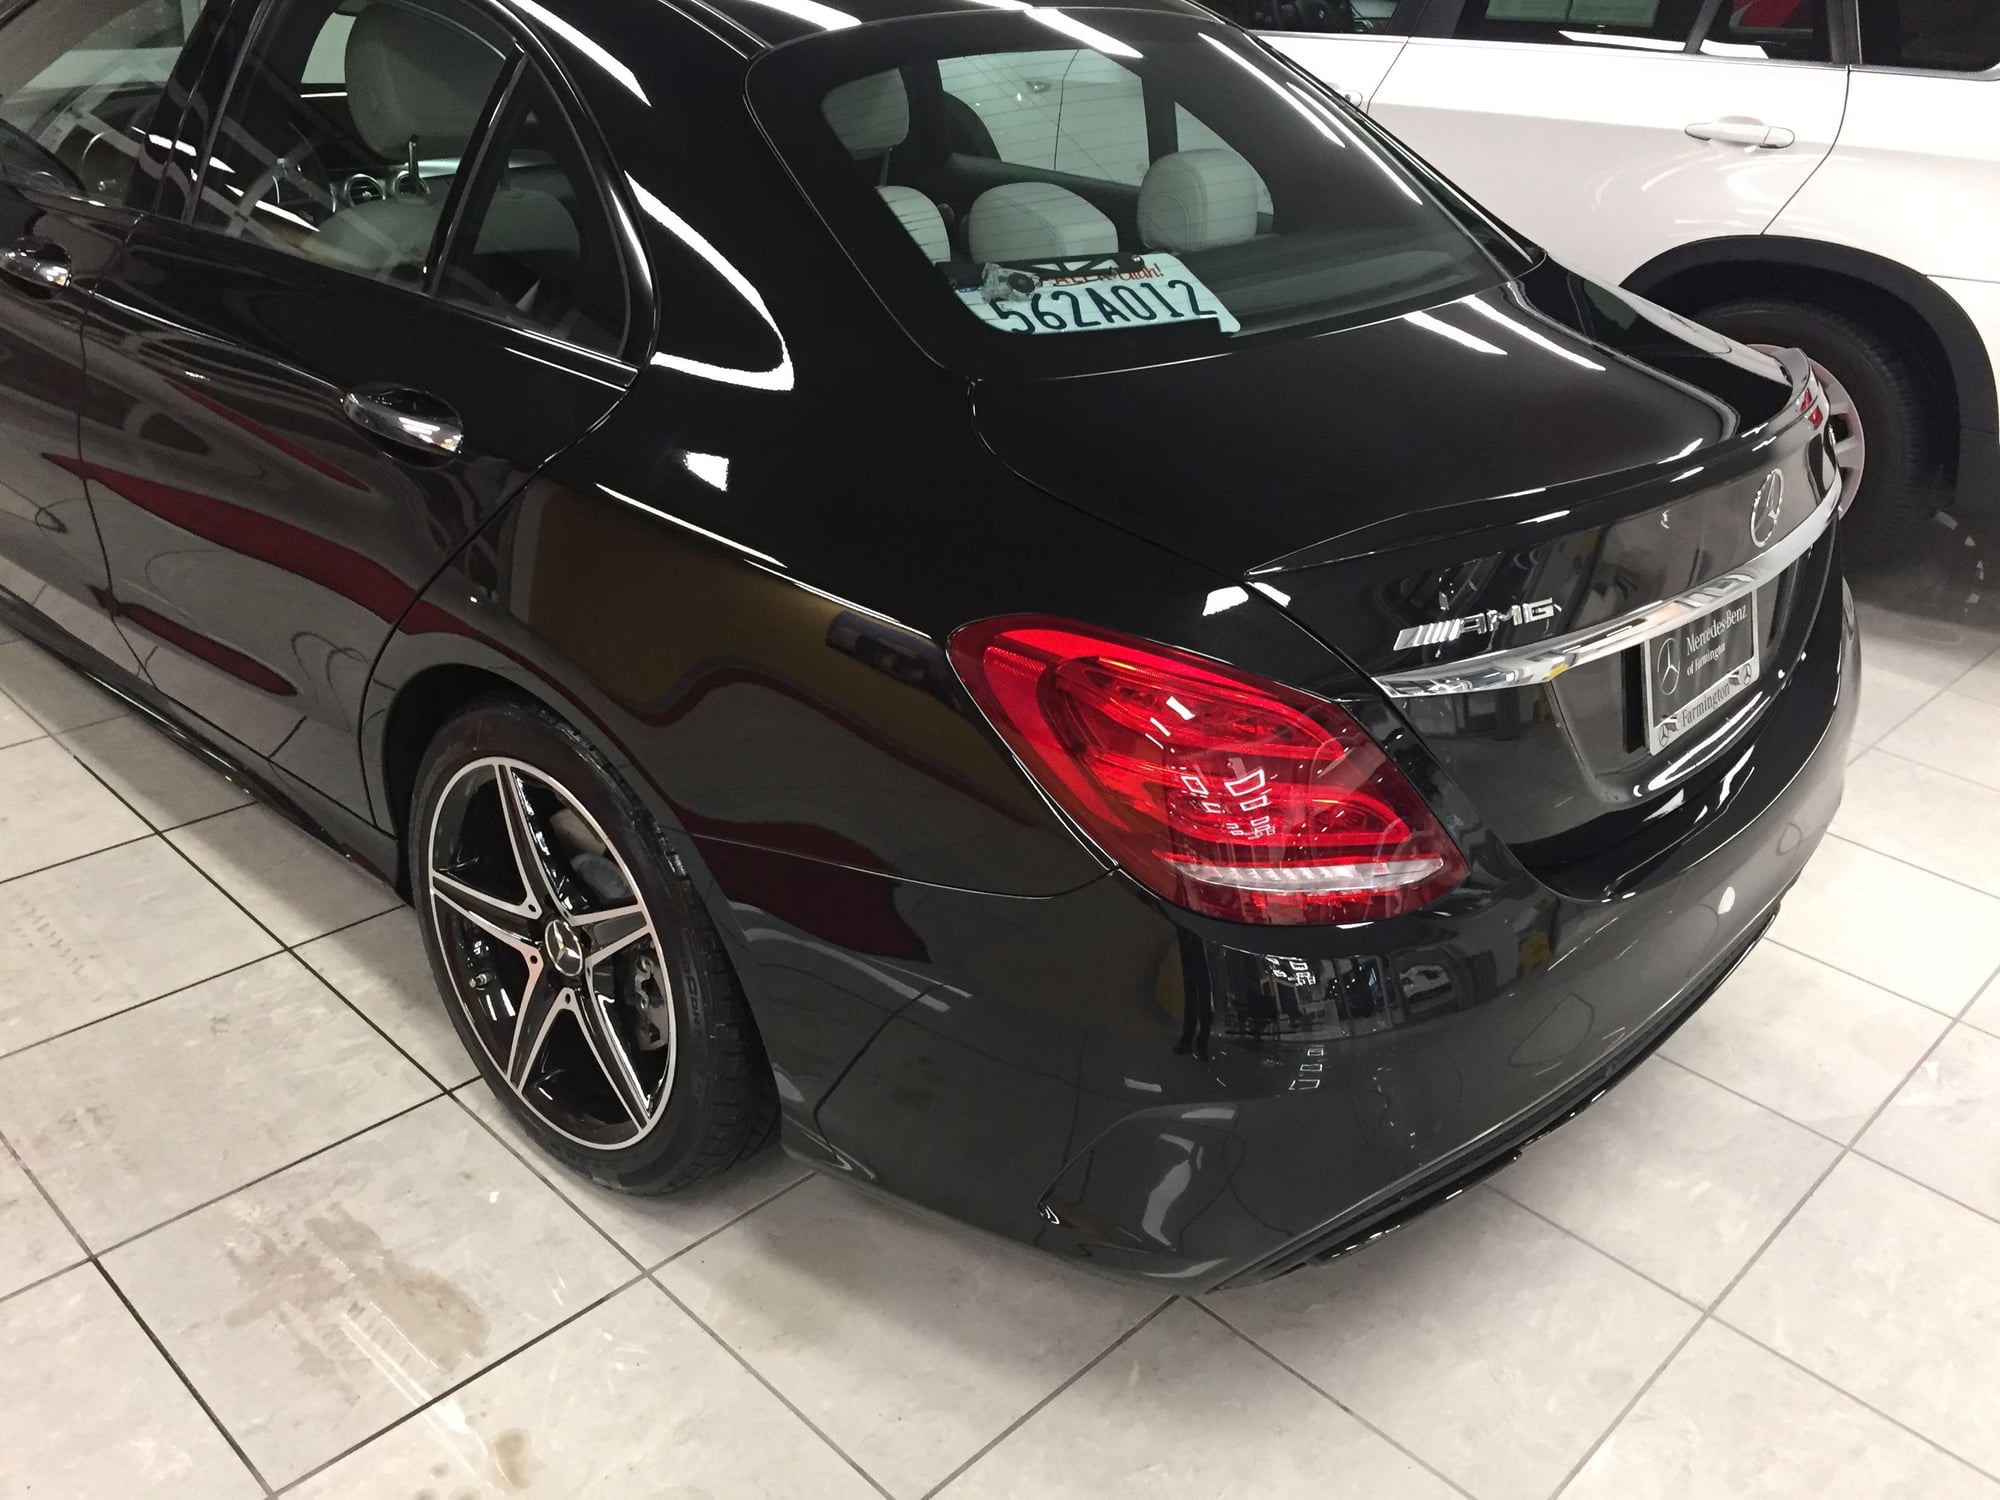 2017 Mercedes-Benz C43 AMG - LEASE TRANSFER: 2017 C43 AMG with 17 months and lots of miles left - Used - VIN 55SWF6EB3HU193147 - 12,800 Miles - 6 cyl - AWD - Automatic - Sedan - Black - North Salt Lake, UT 84054, United States